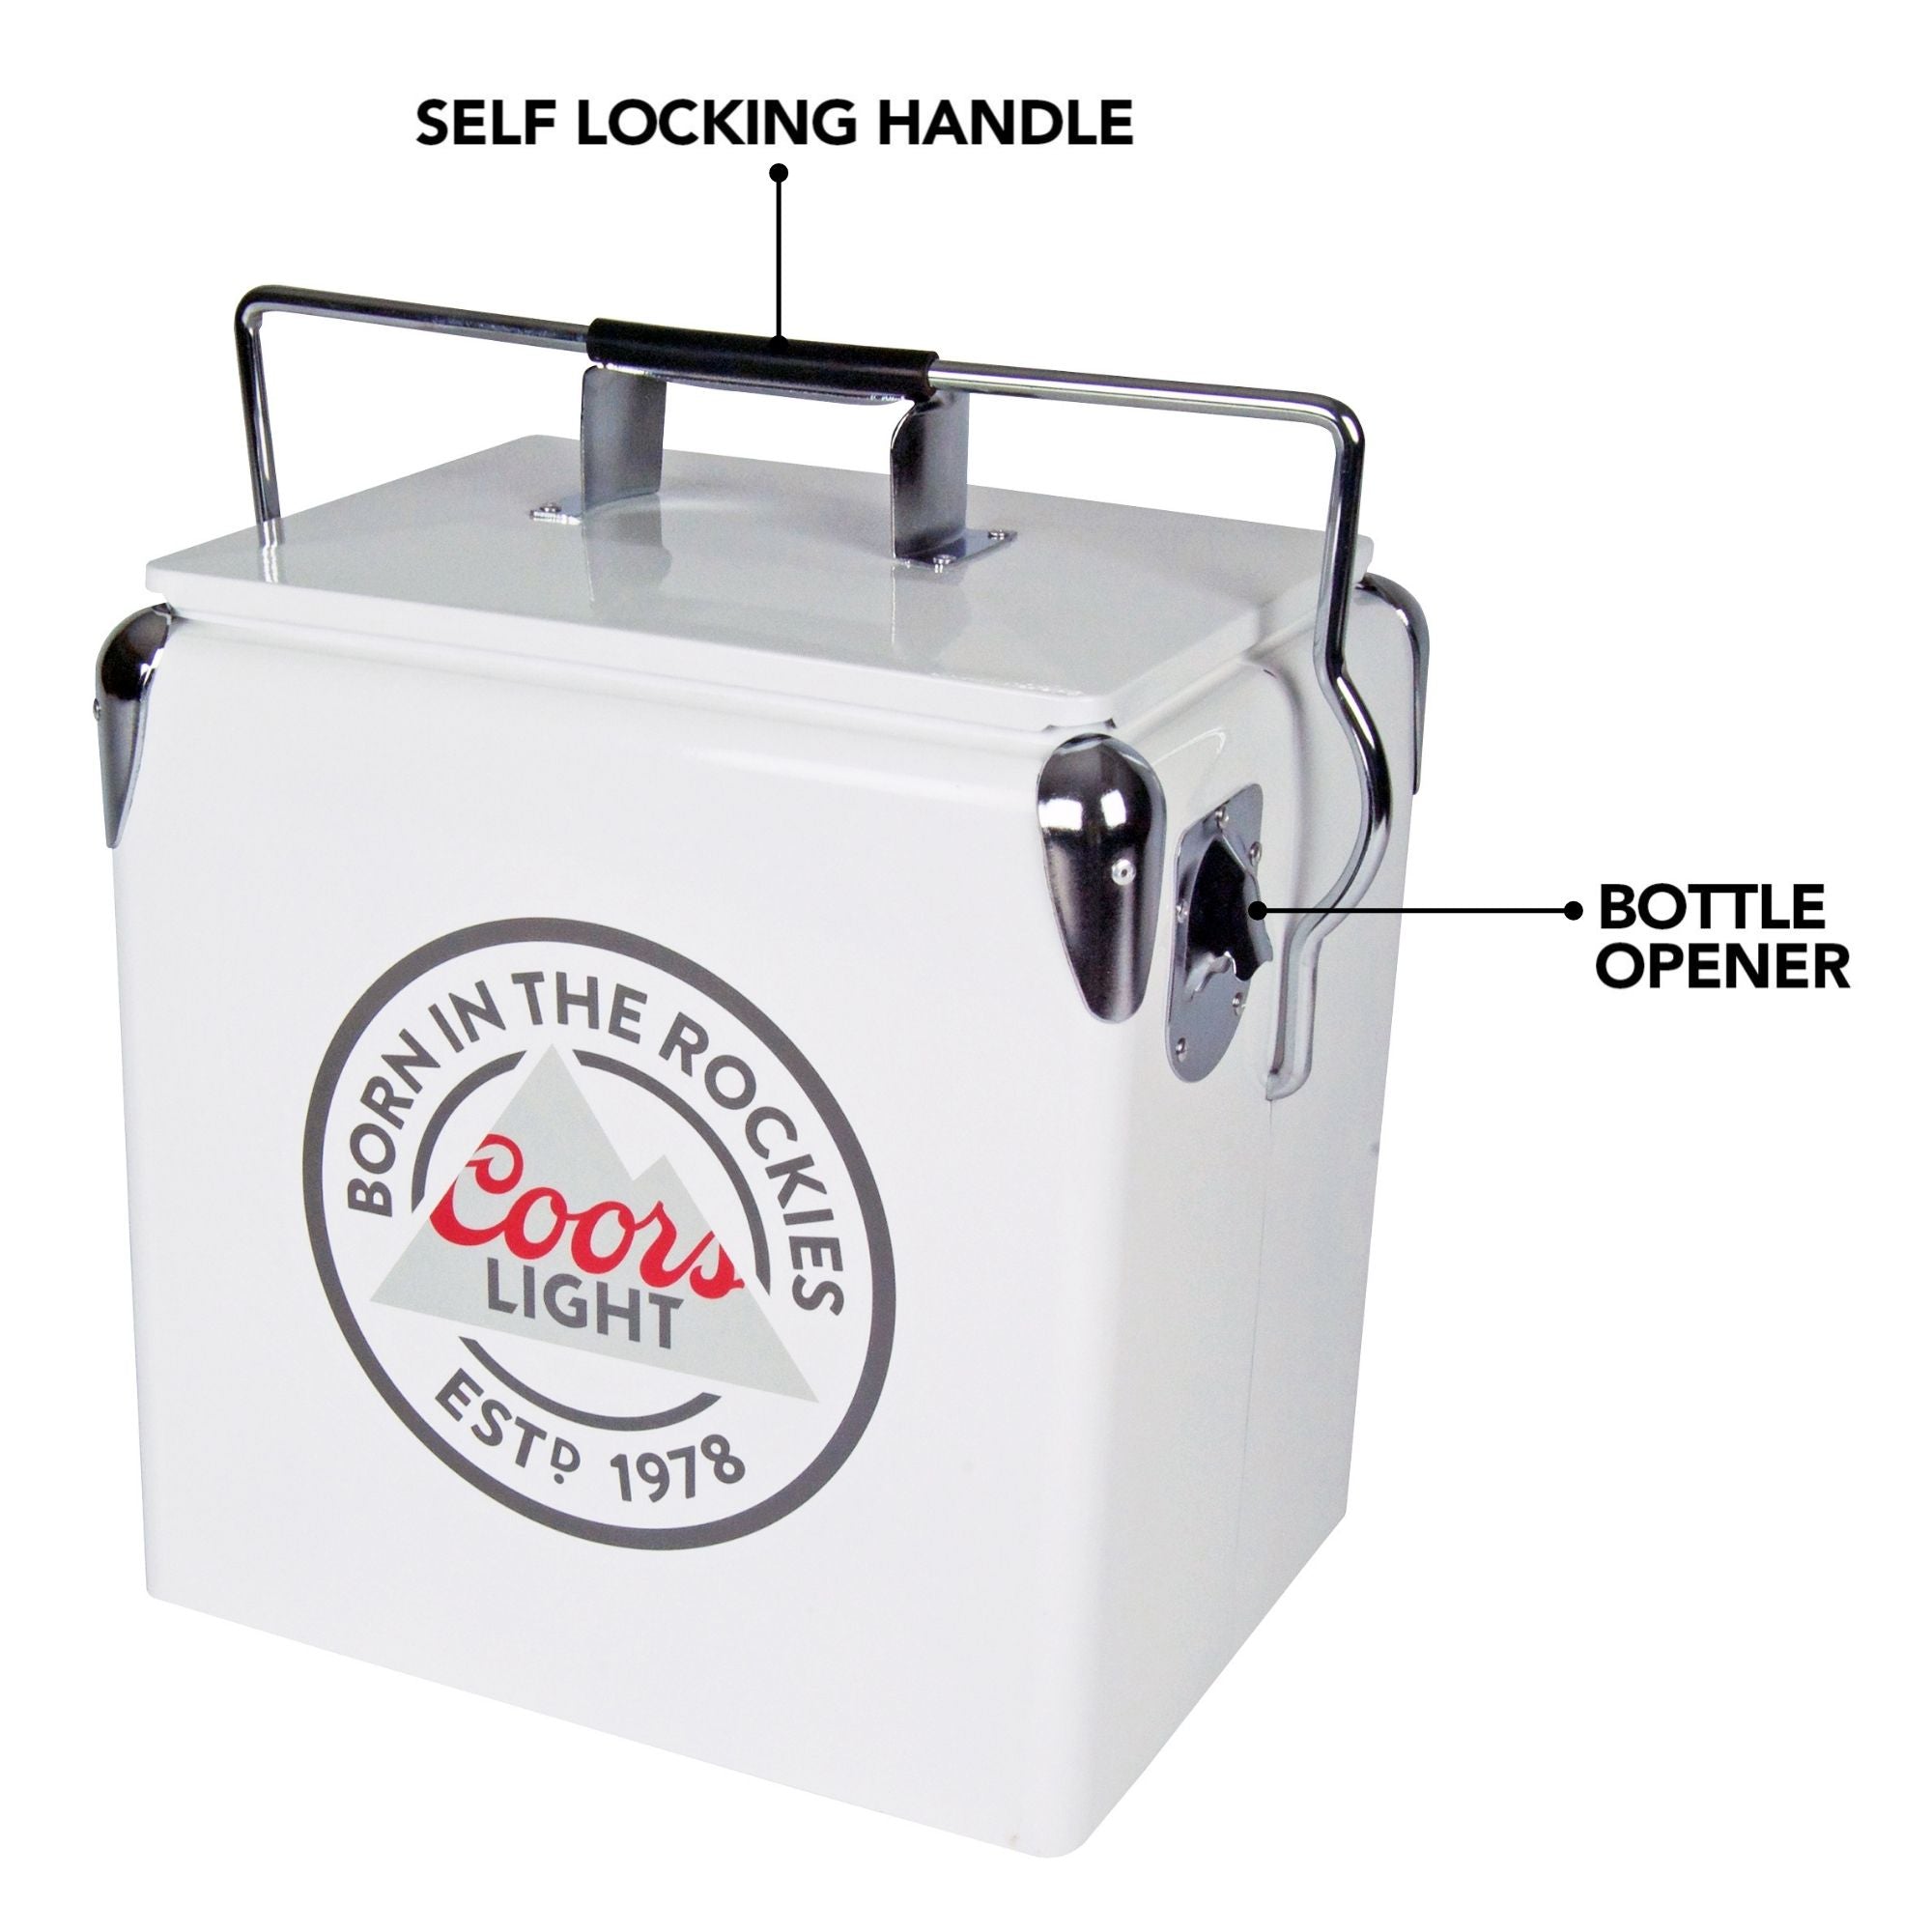 Product shot of Coors Light 14 qt retro cooler with bottle opener, closed, on a white background, with parts labeled: Self-locking handle; bottle opener